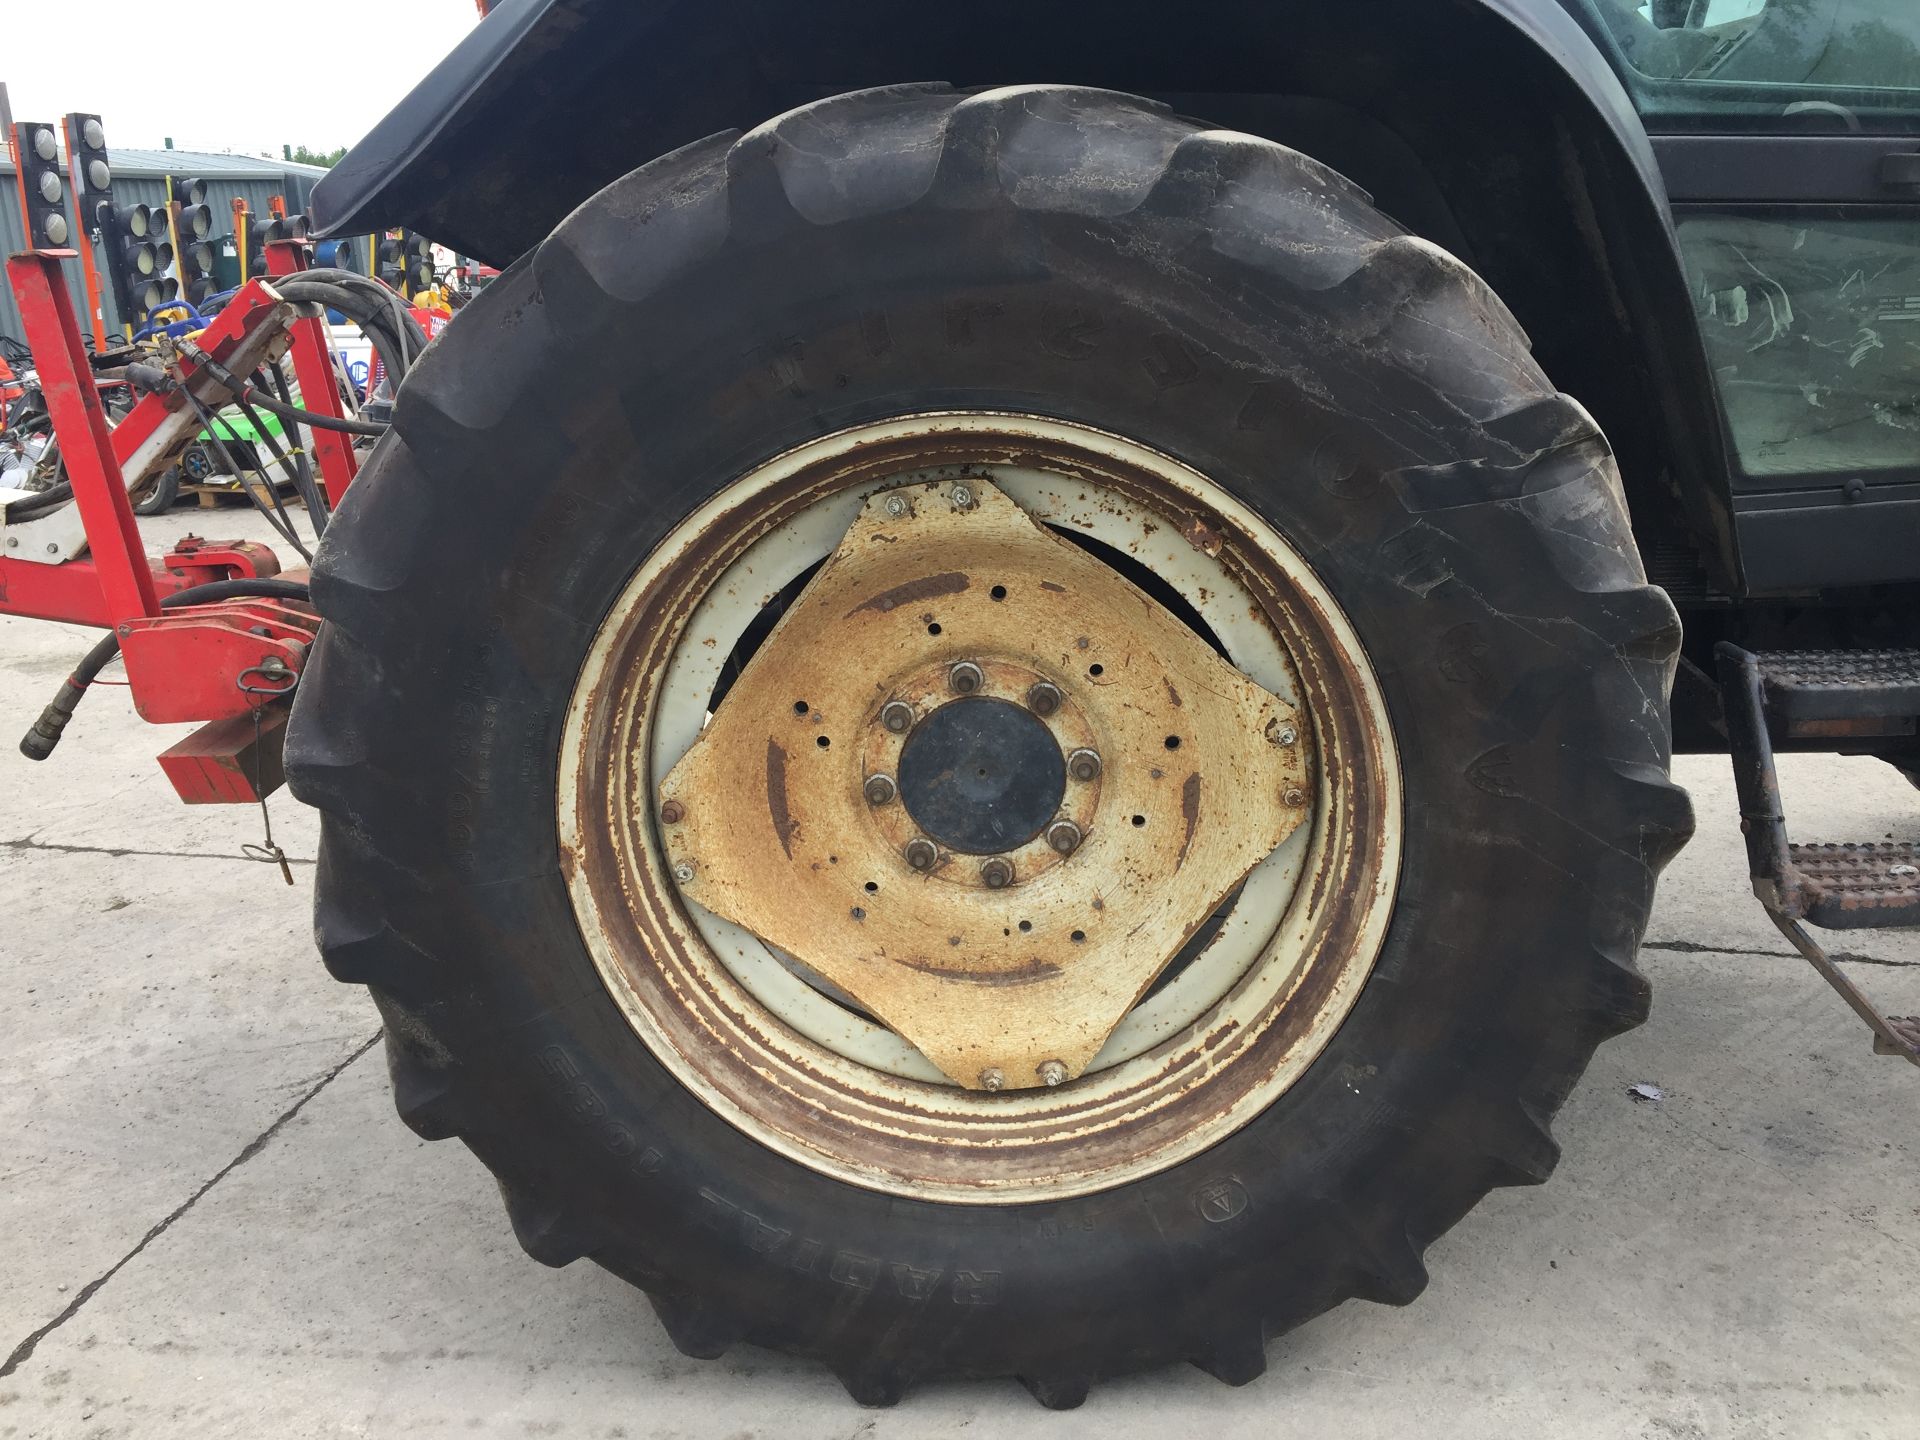 02OY1379 2002 Valtra 8150 HiTech 4WD Tractor - Image 10 of 23